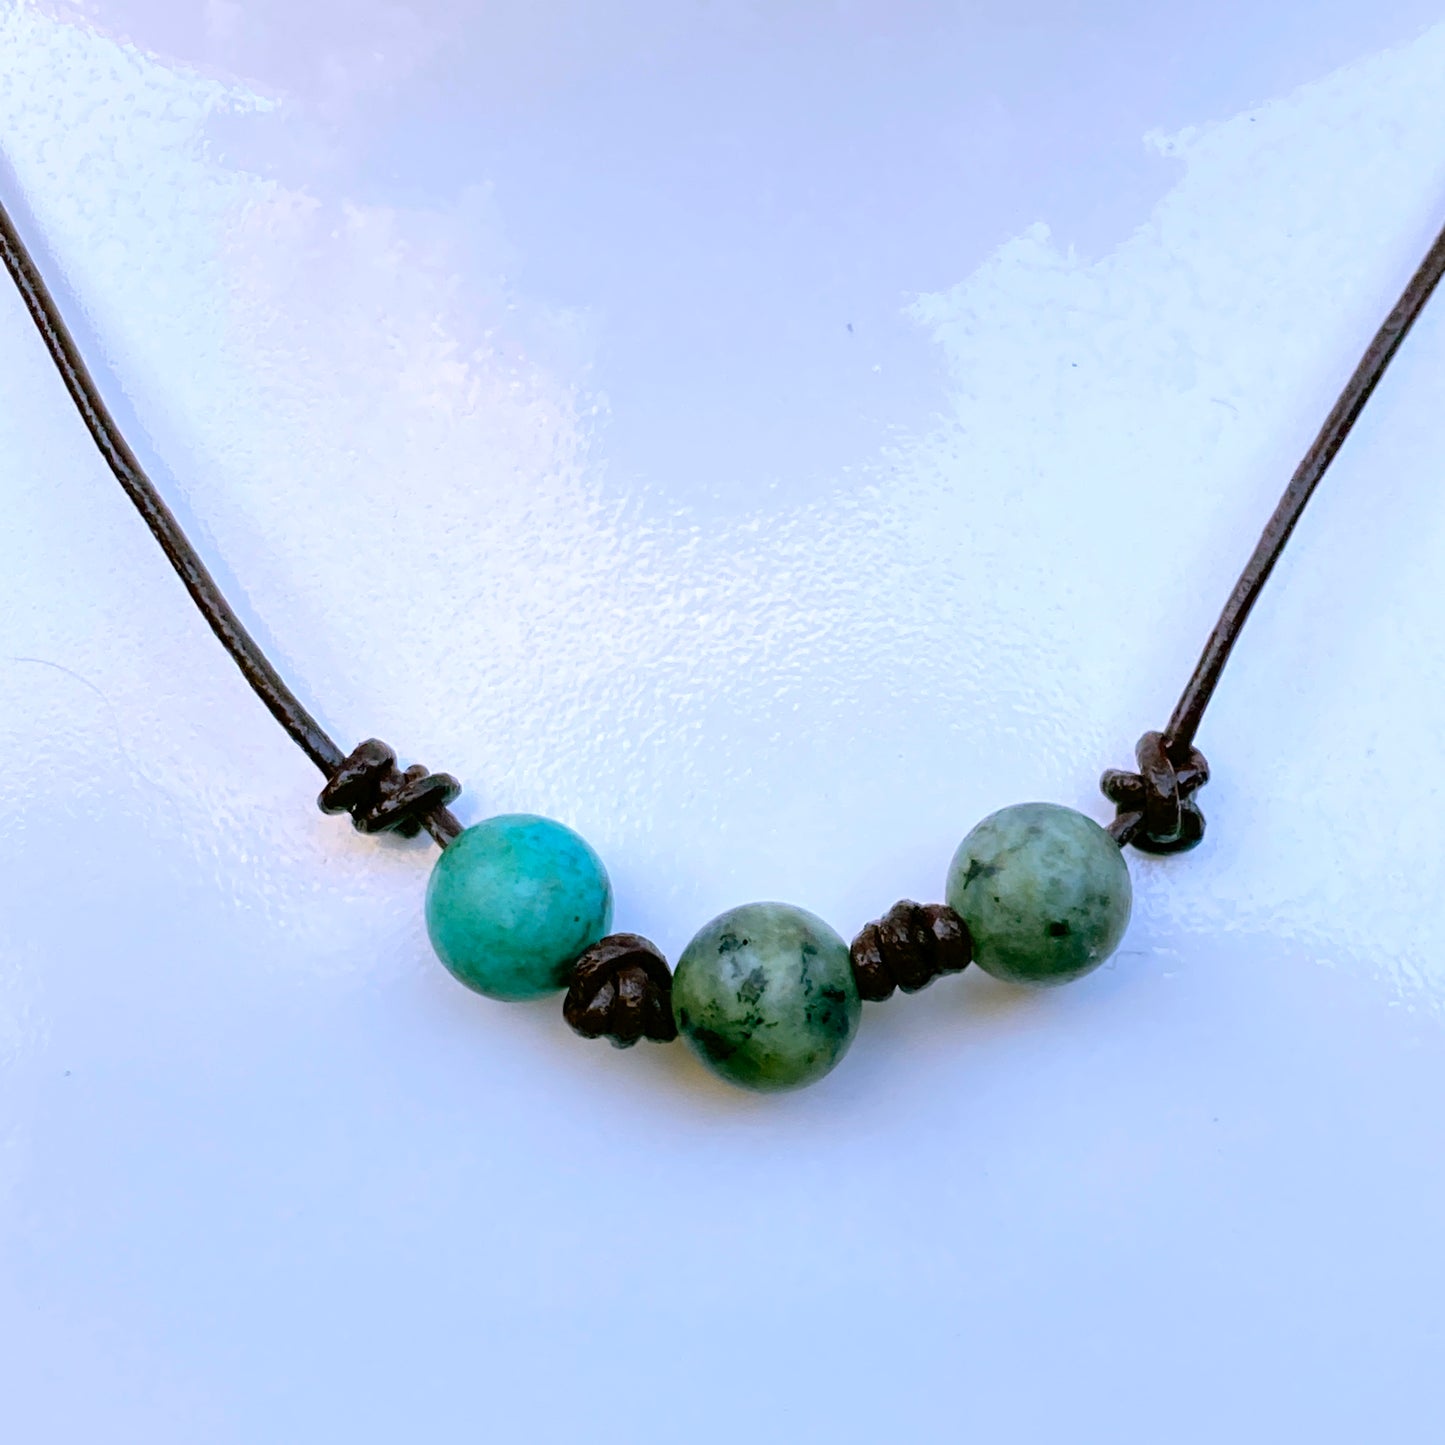 Men’s Leather African Turquoise gemstone Necklace w/ Sterling Silver Clasp